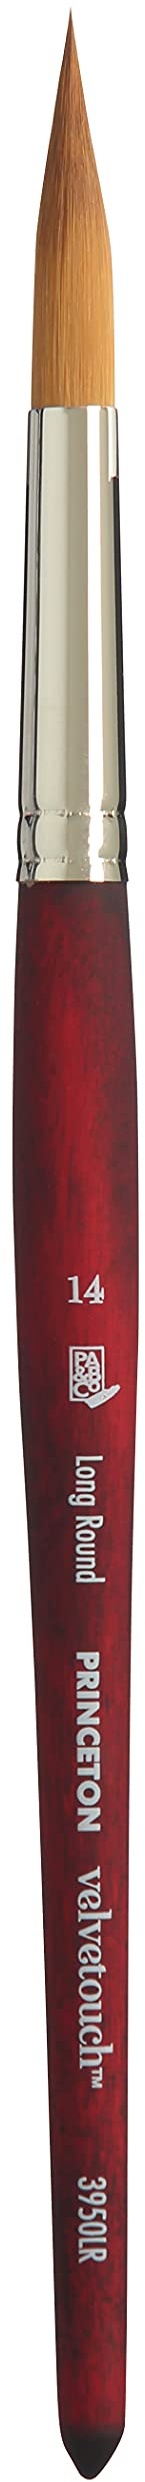 Princeton Velvetouch Artiste, Mixed-Media Brush for Acrylic, Watercolor & Oil, Series 3950 Long Round Luxury Synthetic, Size 14